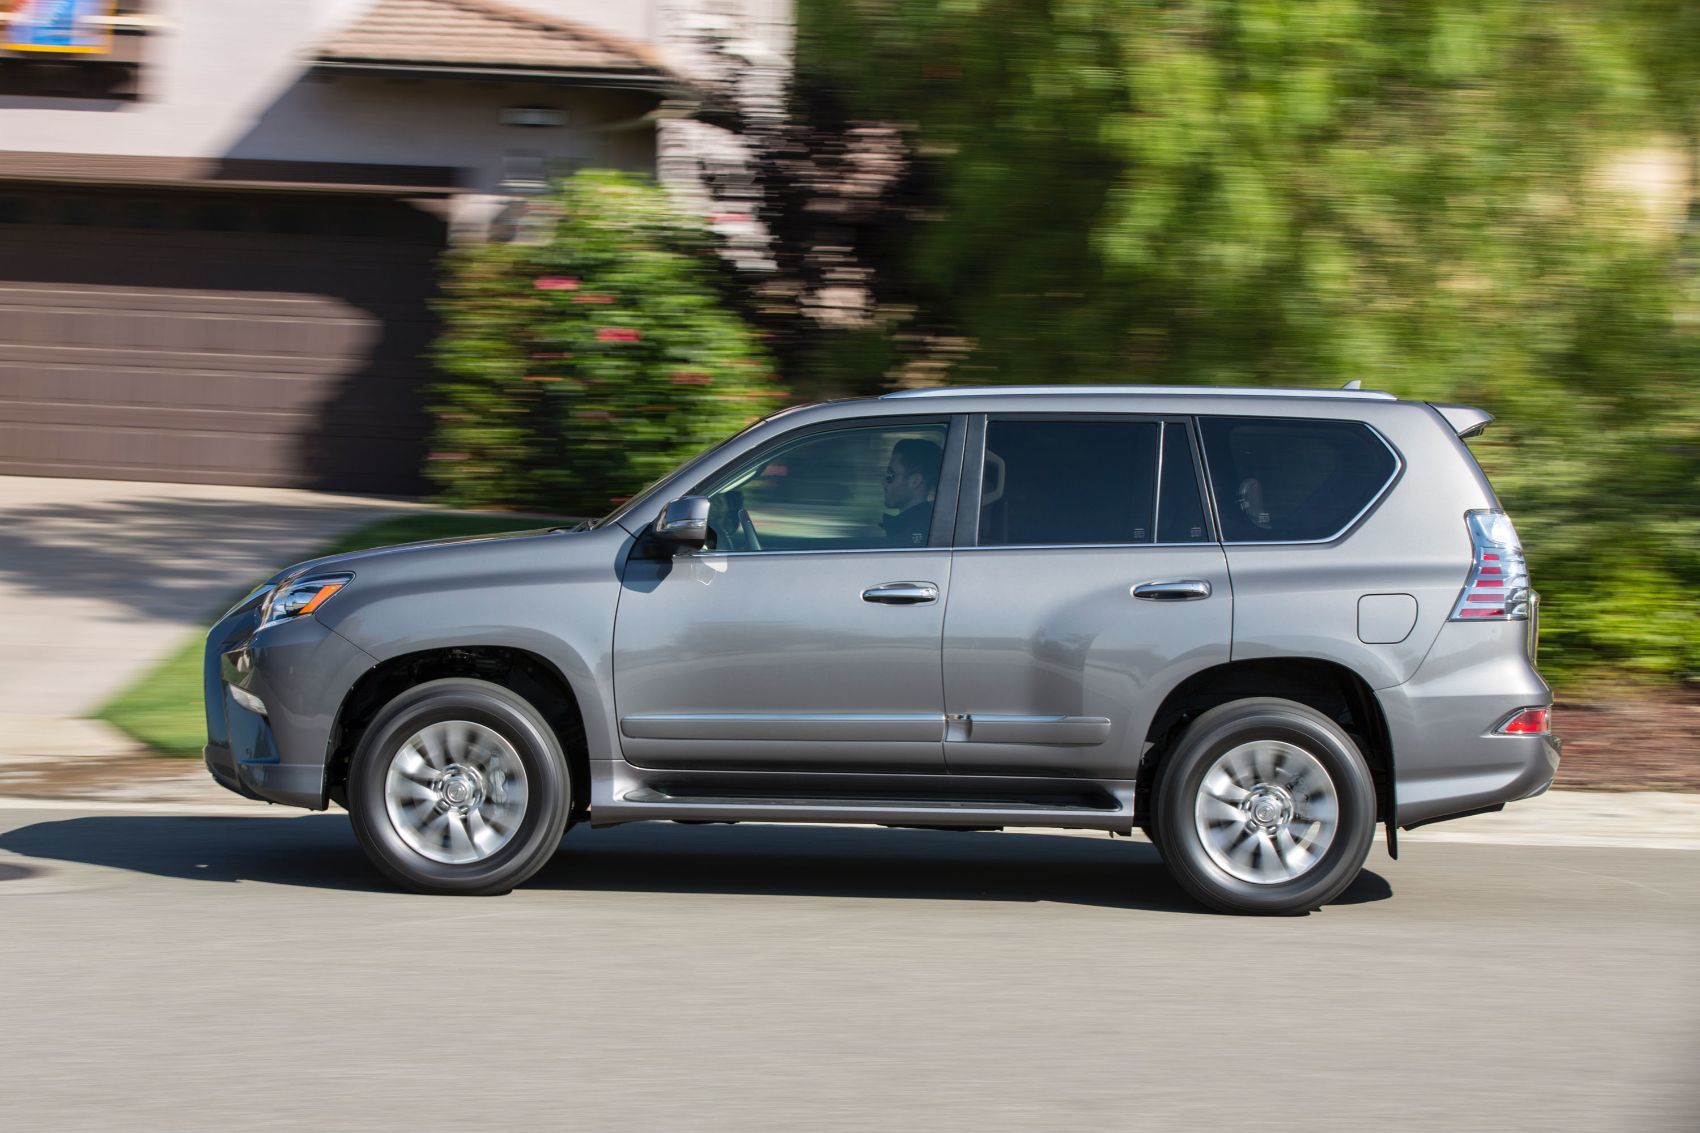 2019 Lexus GX 460 Review: Solid But Long In The Tooth